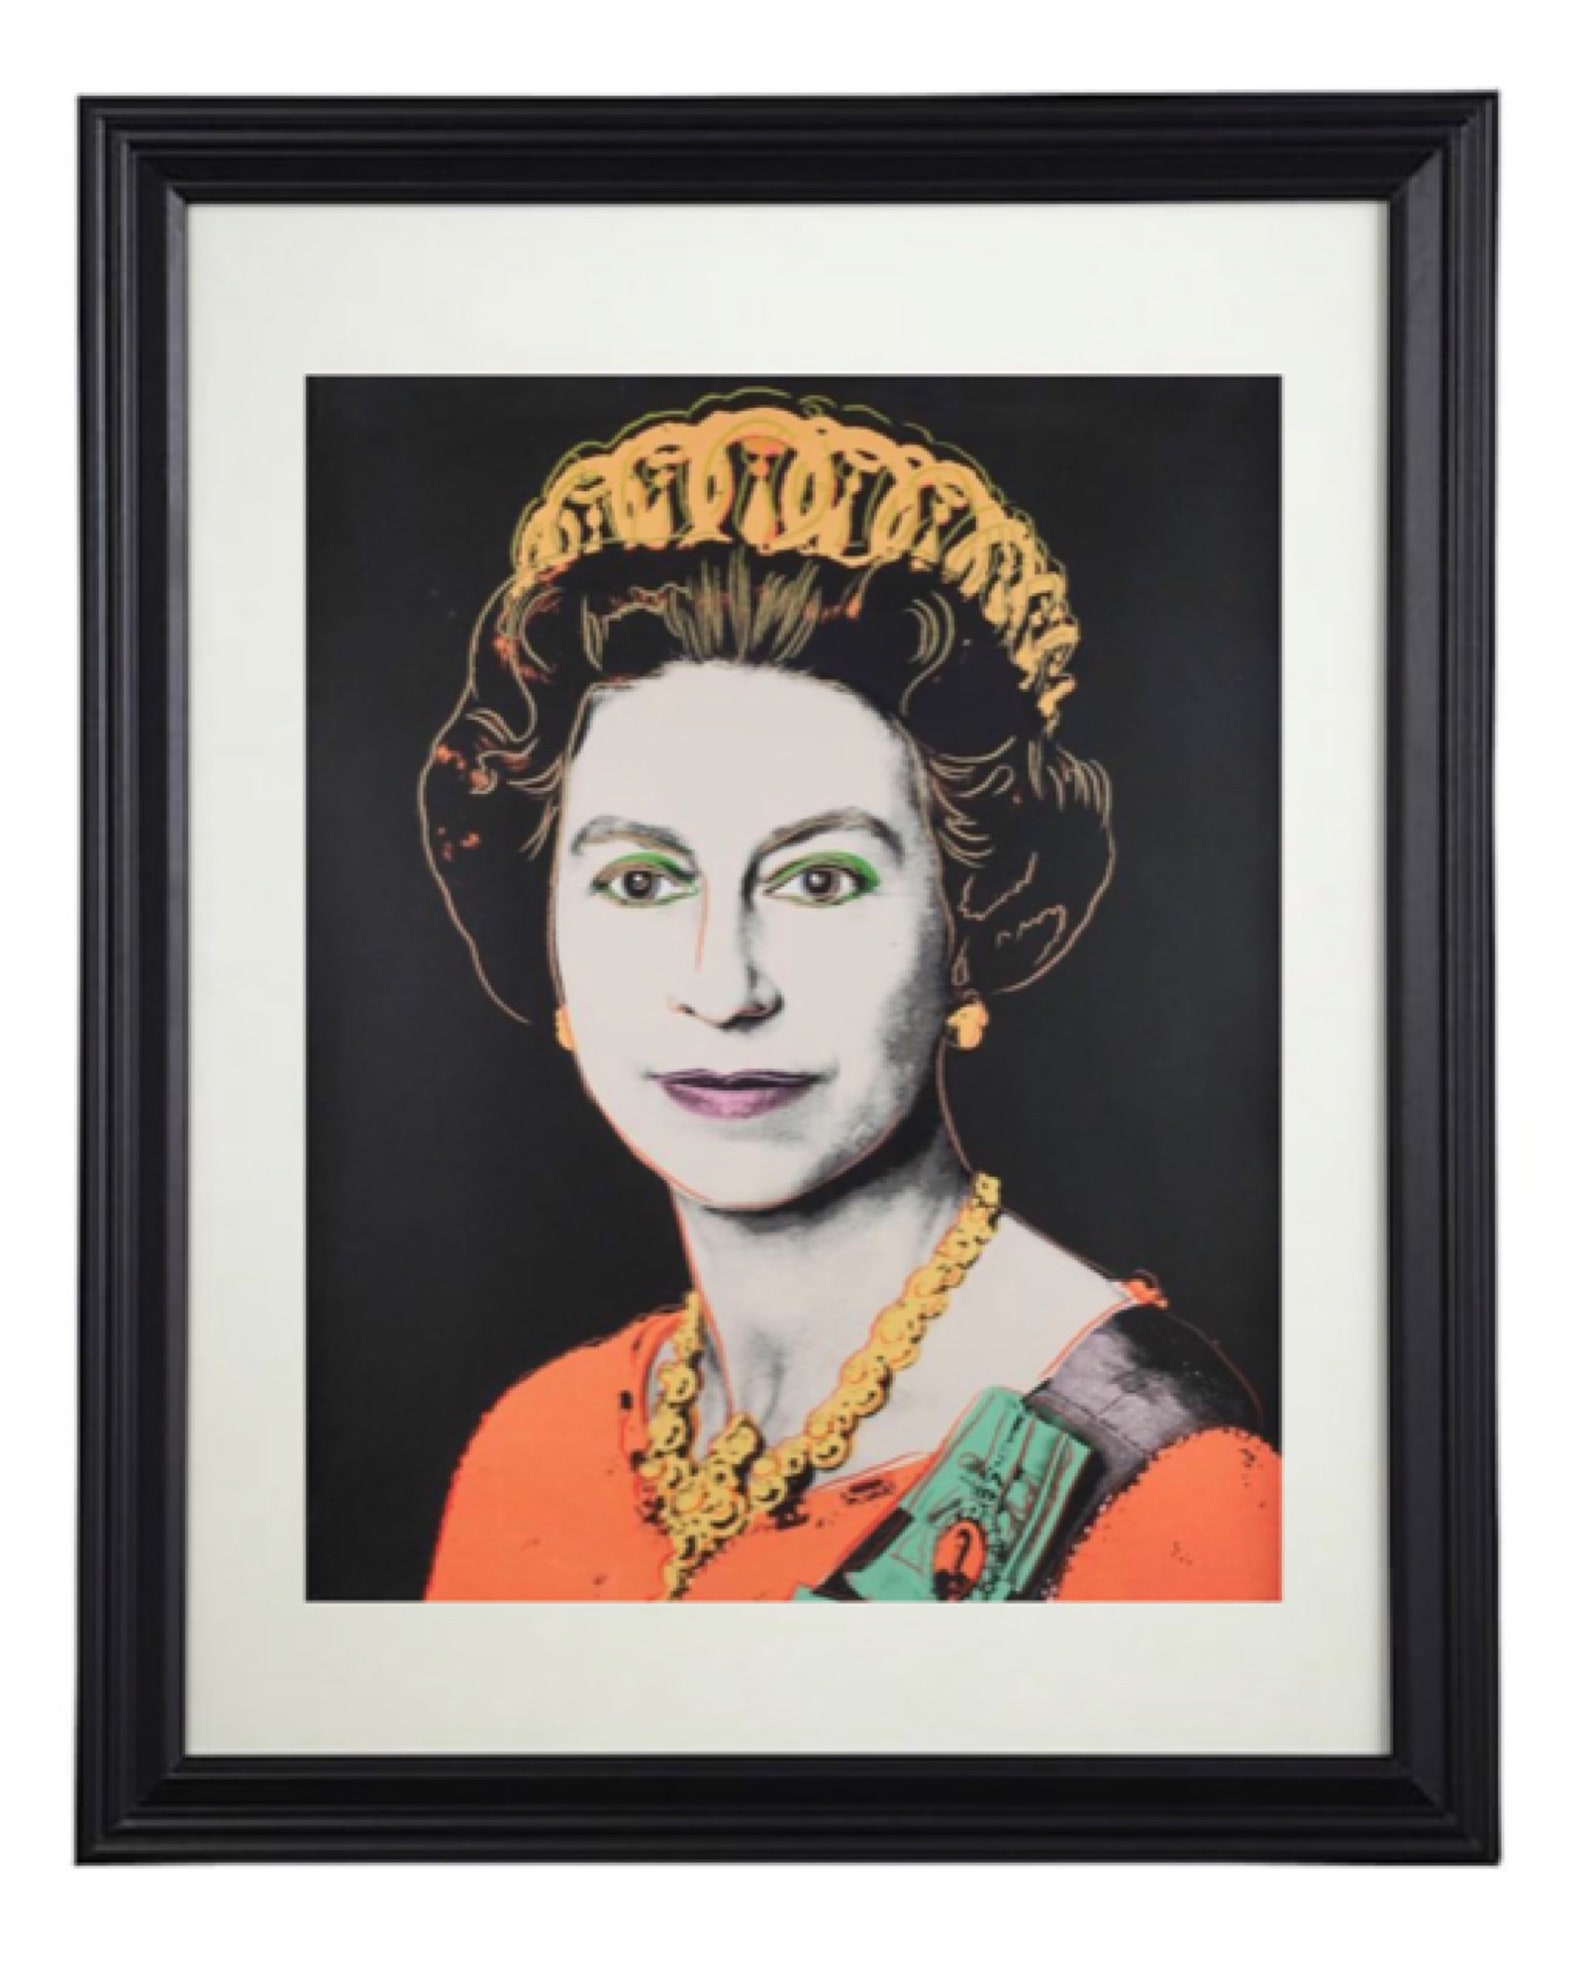 Queen Elizabeth Warhol Lithograph Collection - Etsy